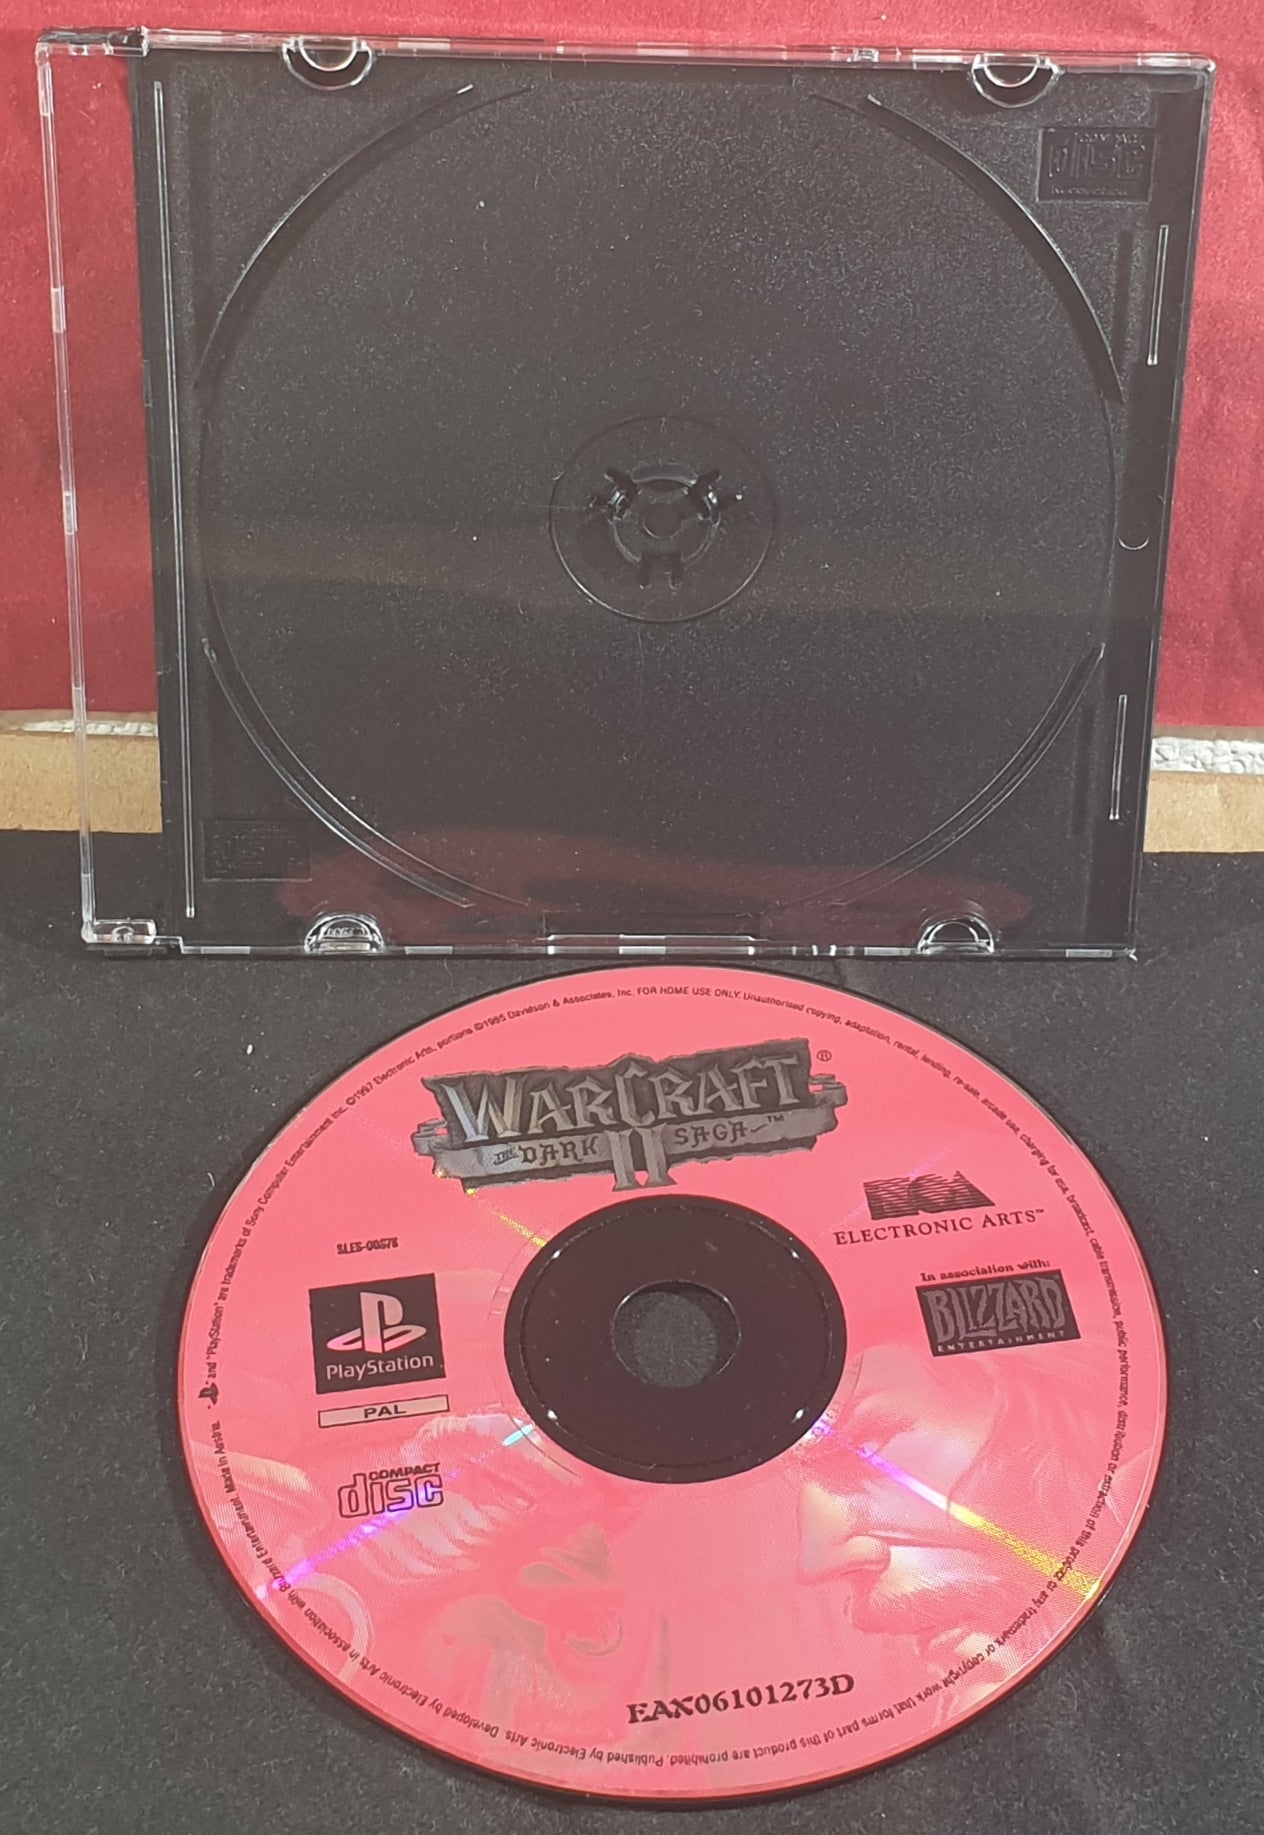 Warcraft II the Dark Saga Sony Playstation 1 (PS1) Game Disc Only